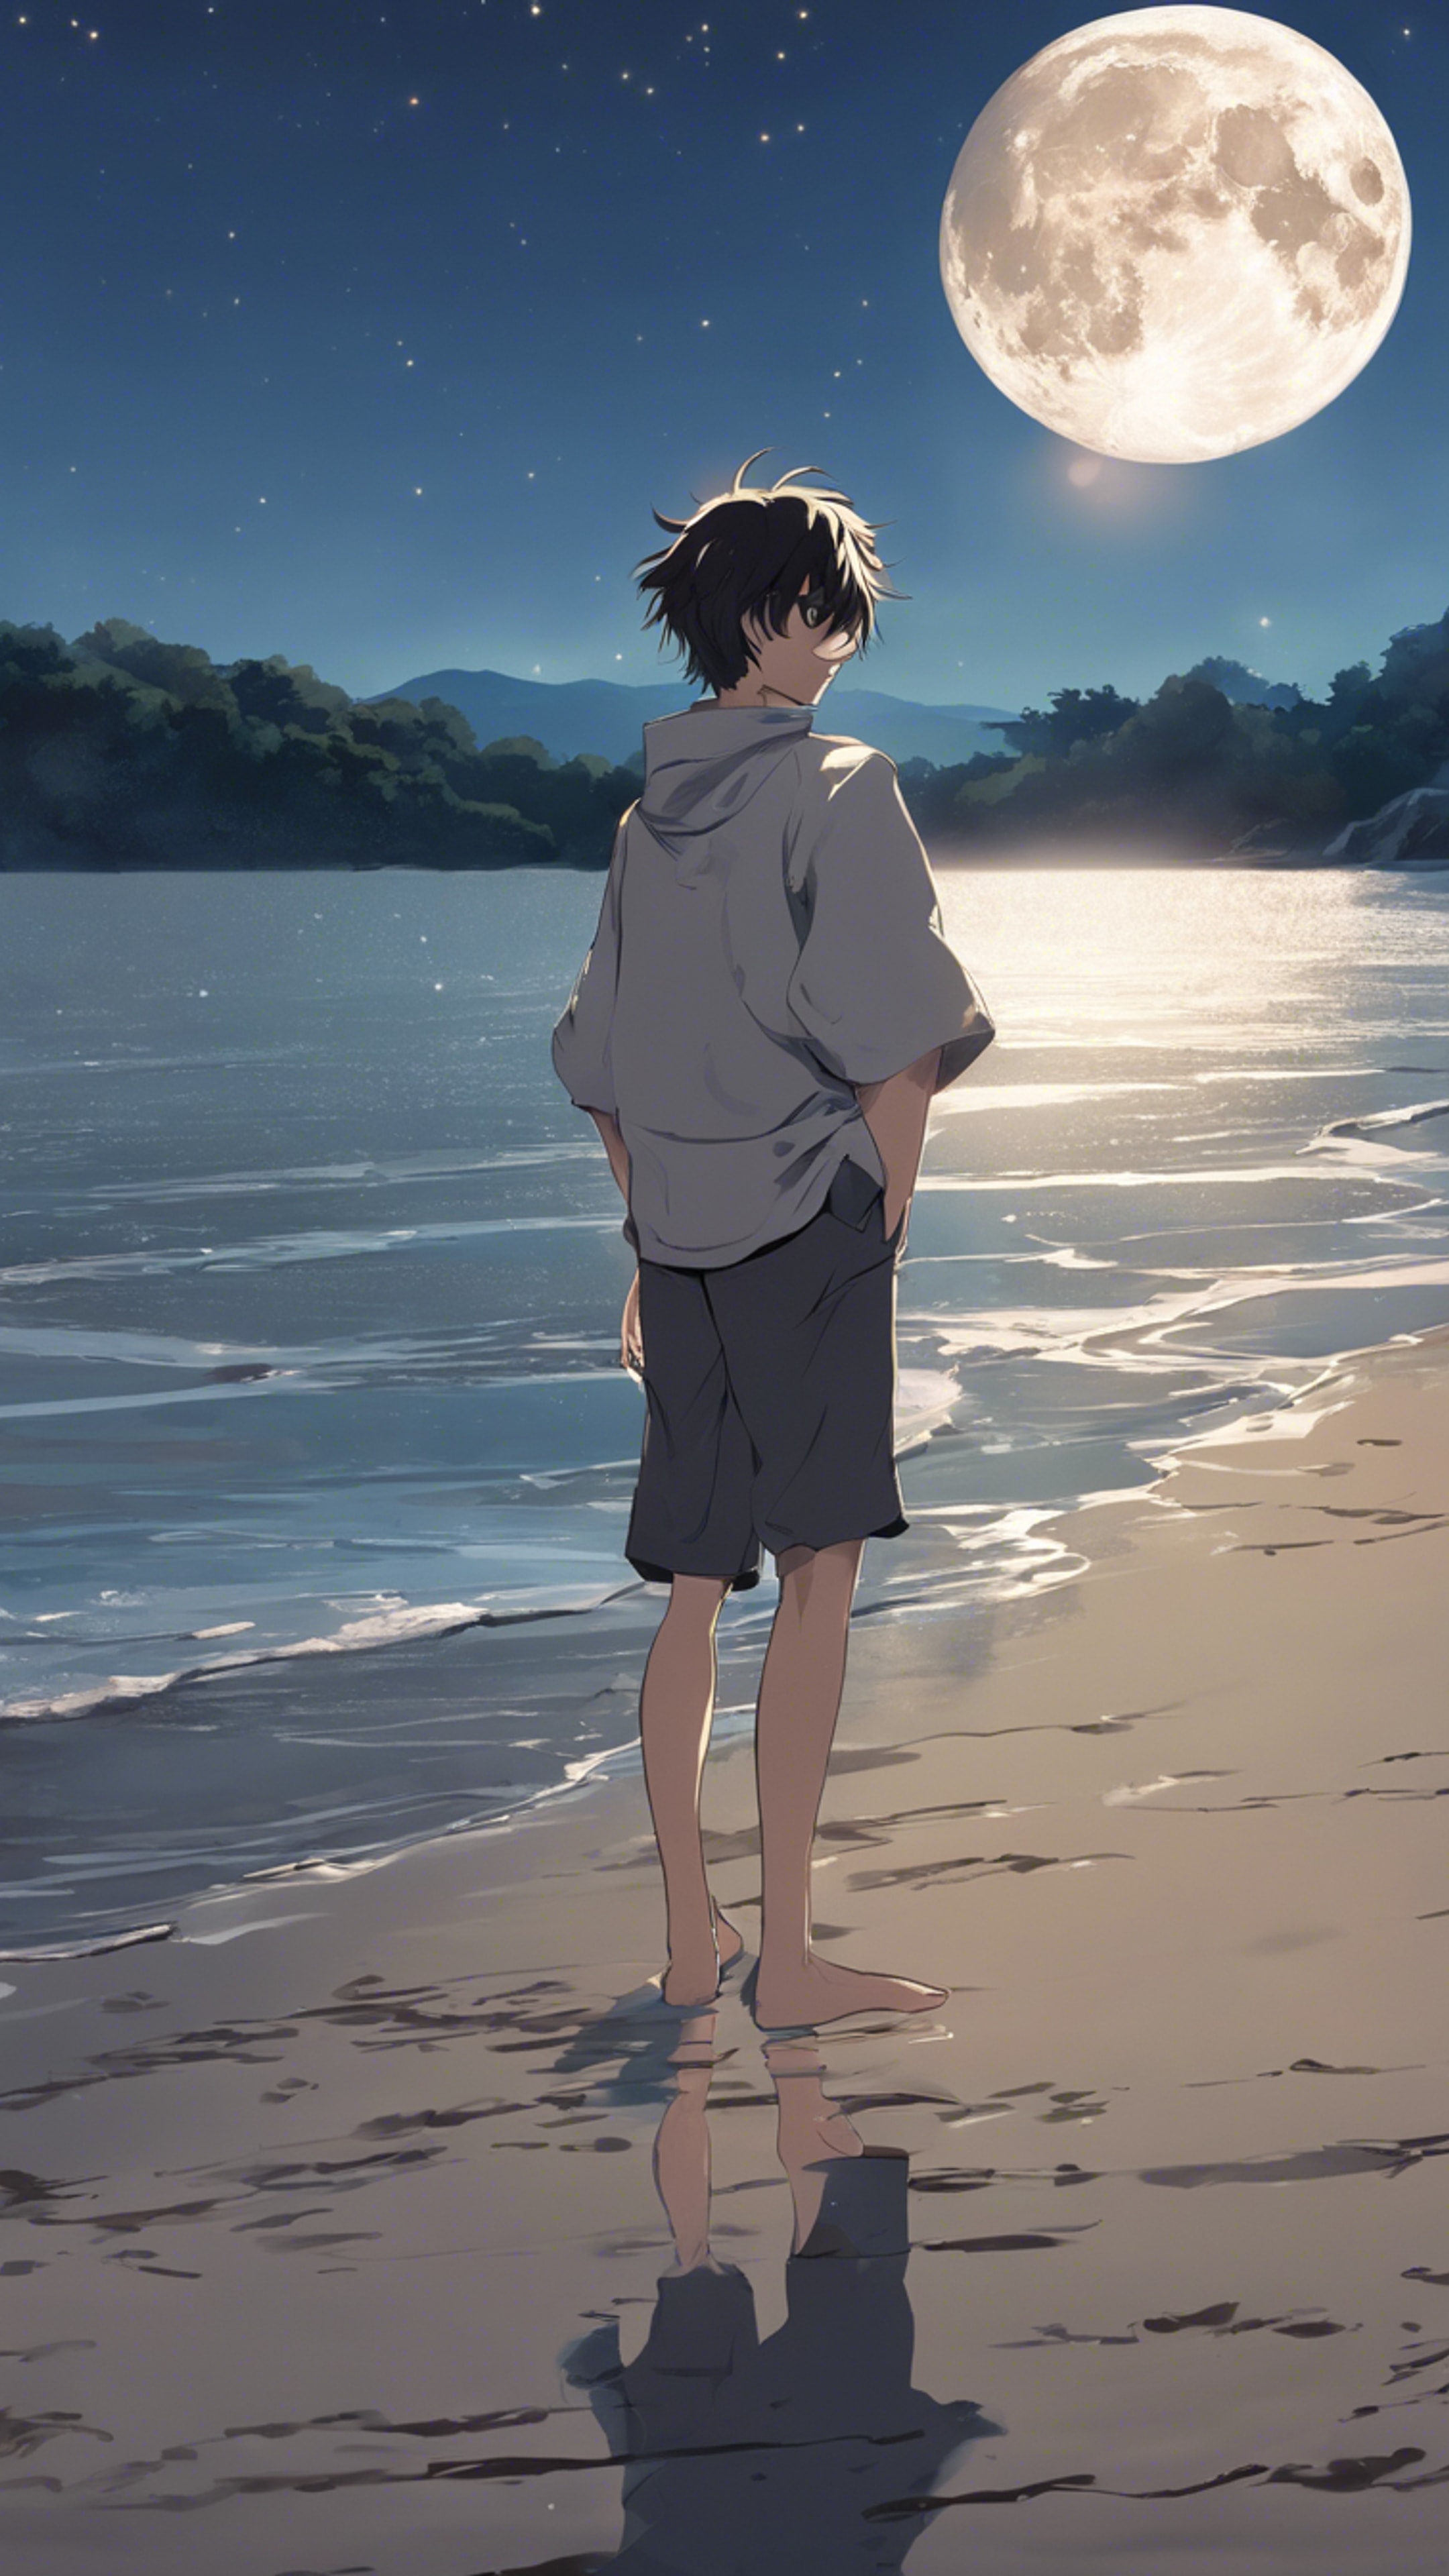 An anime boy standing barefoot on the shore, with the moon reflecting in upturned, joyous eyes. Wallpaper[a80f9c3e465041ad9759]